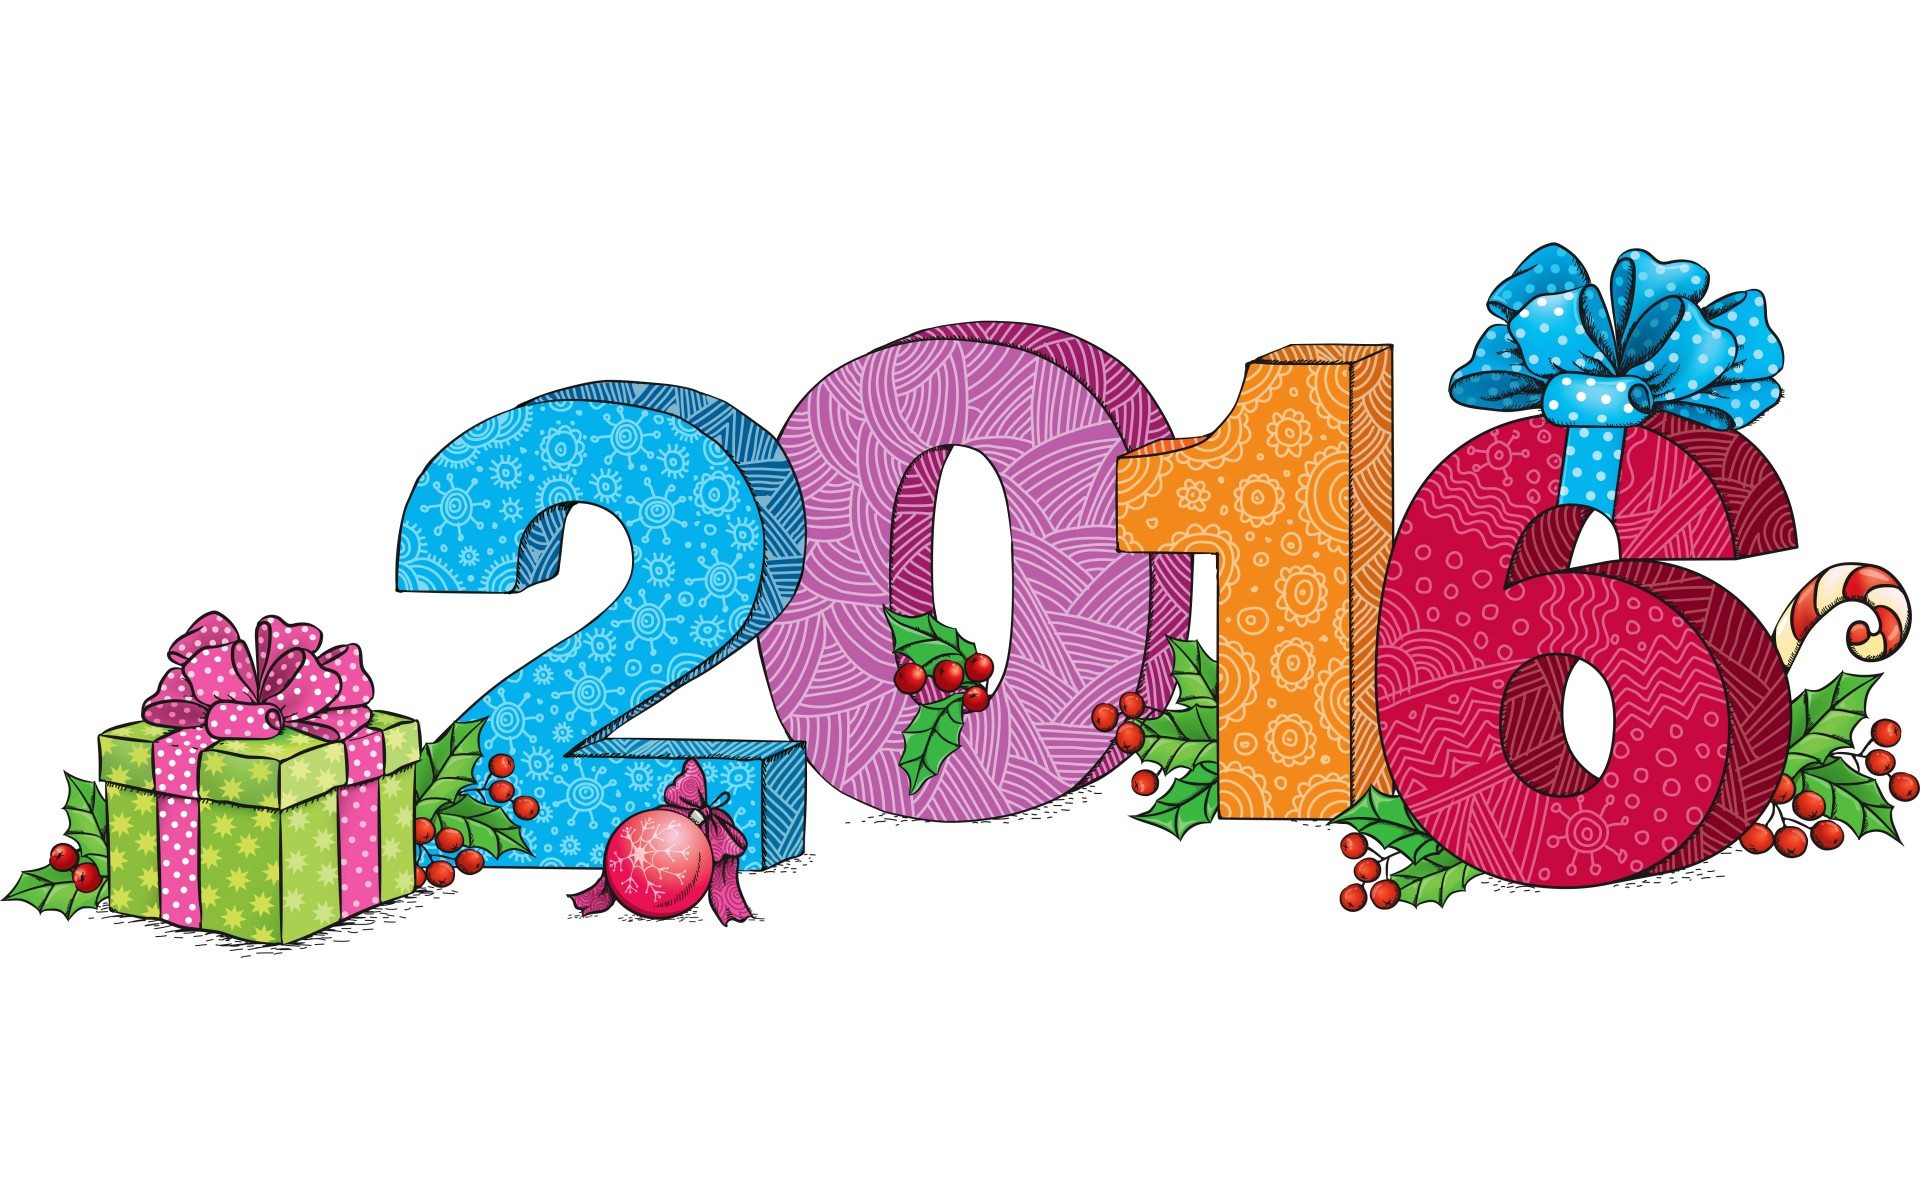 2016 clipart new year. Happy clip art happynewyearclipartwallpaper